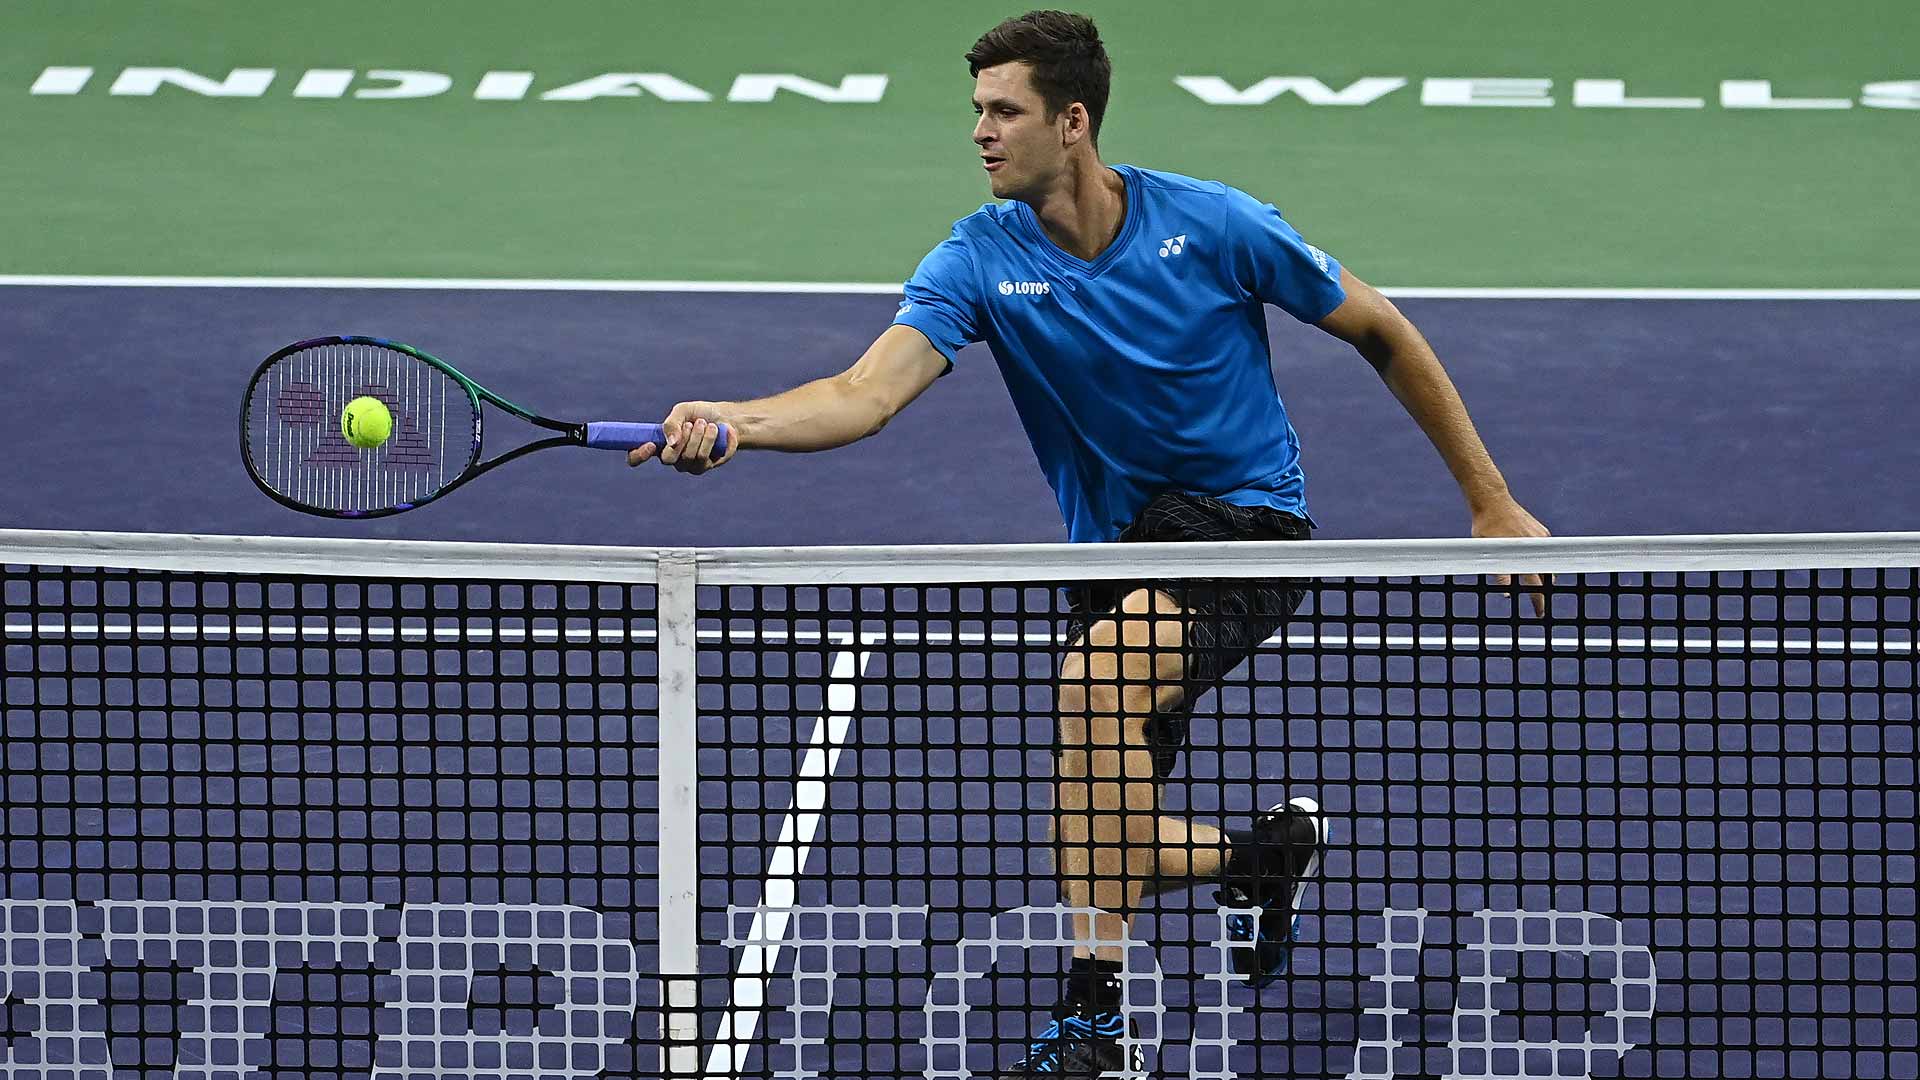 Hubert Hurkacz is pursuing his second ATP Masters 1000 title of the year in Indian Wells.